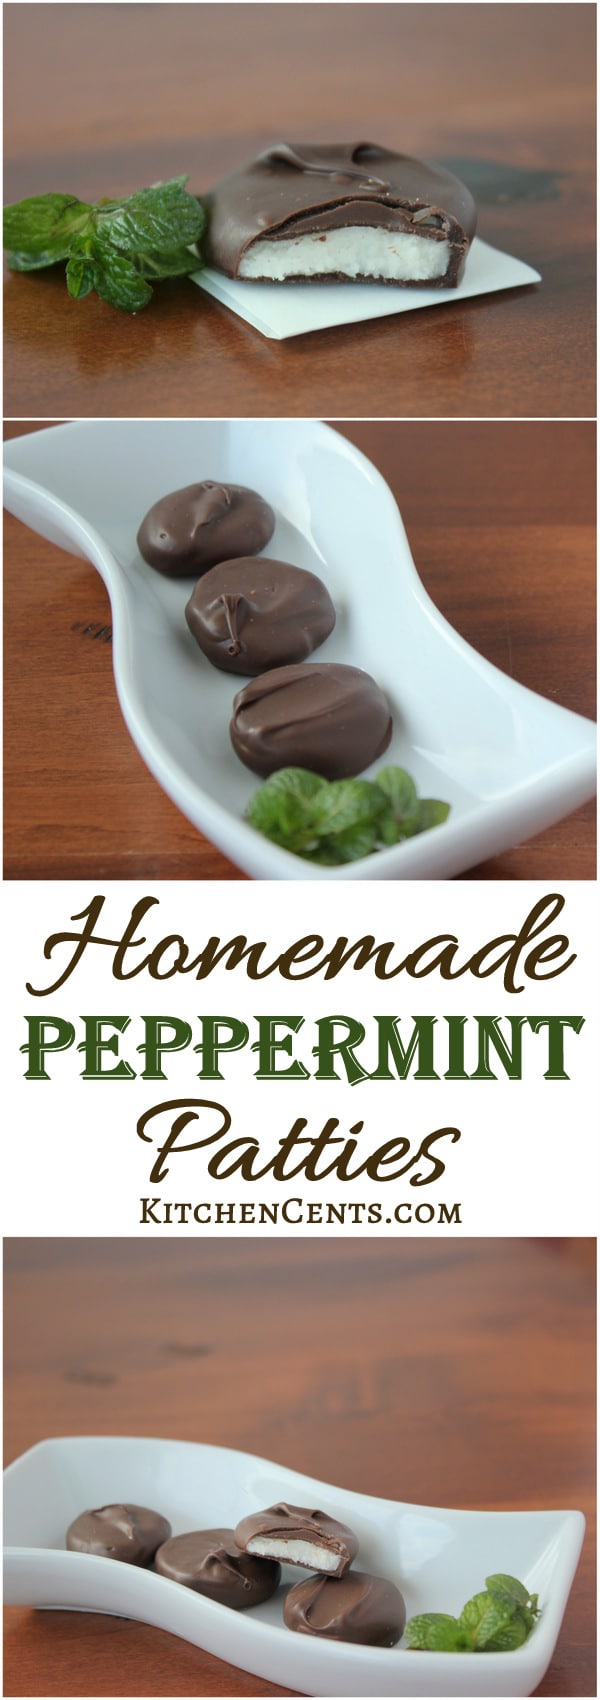 Homemade Peppermint Patties | KitchenCents.com